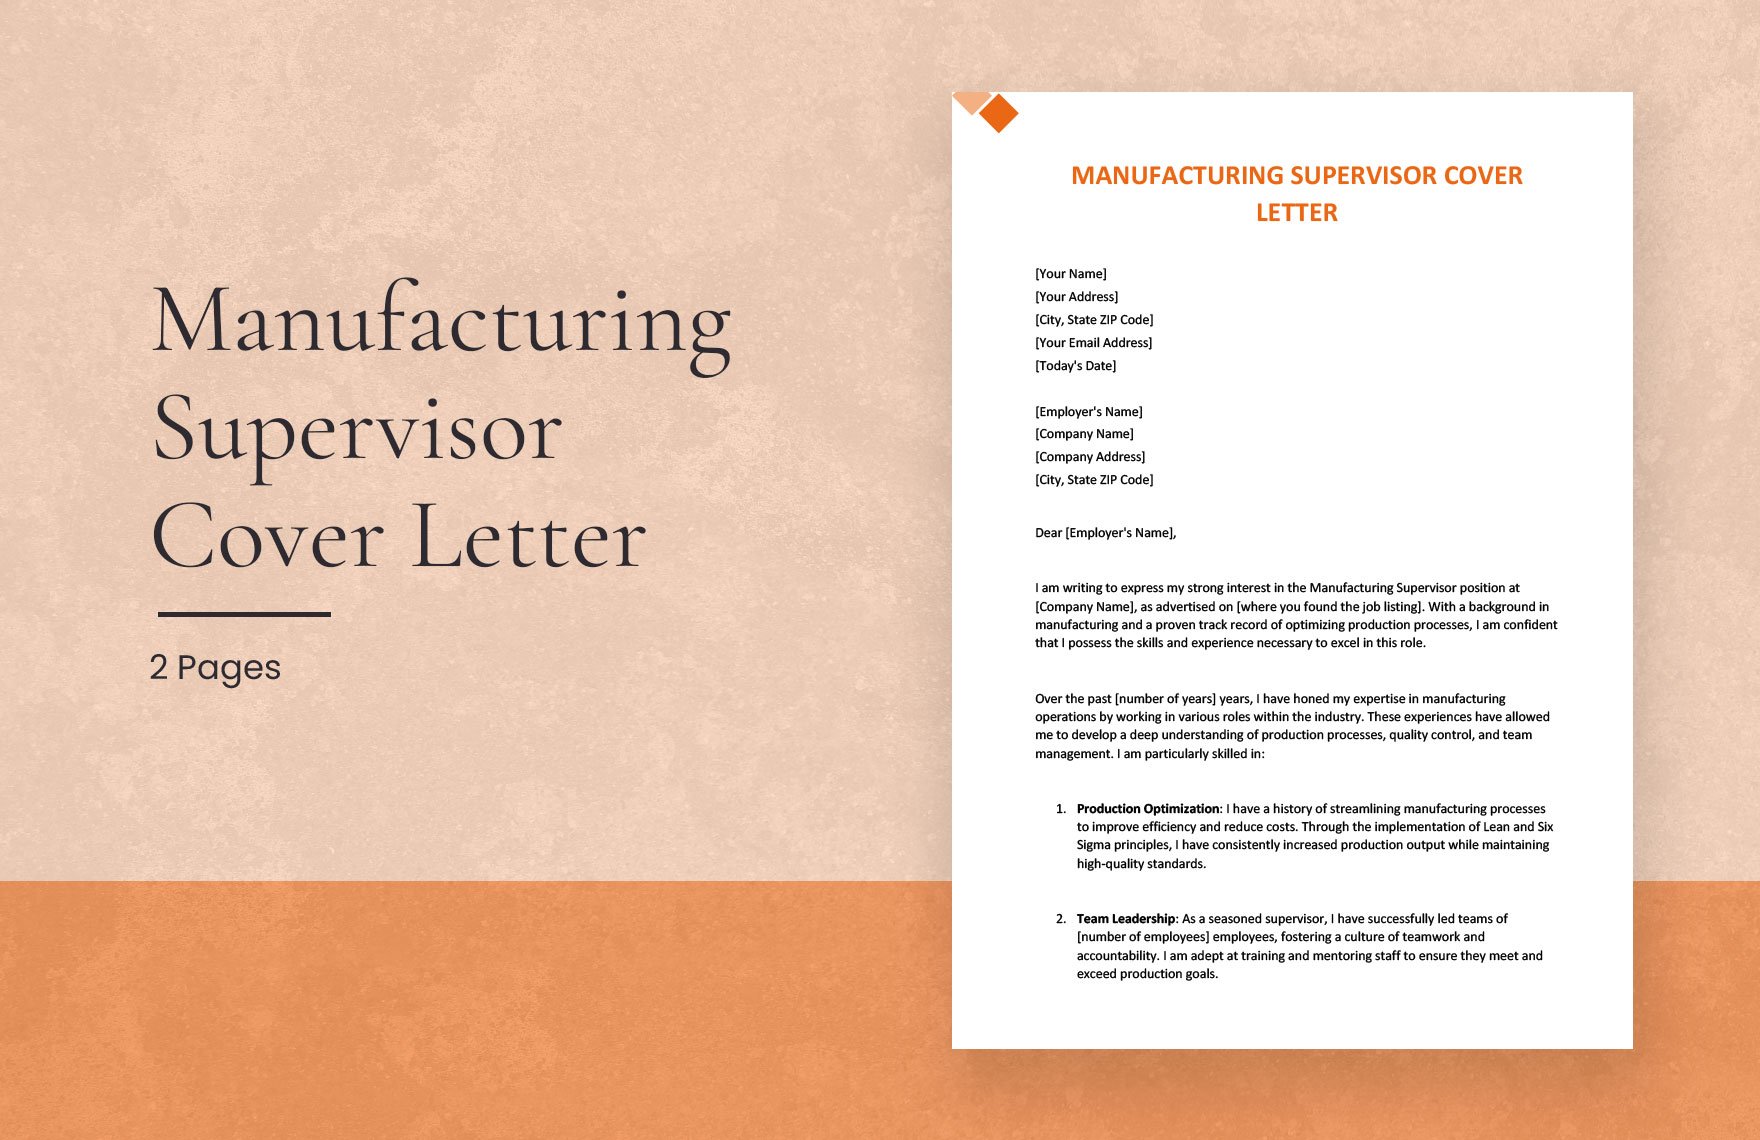 Manufacturing Supervisor Cover Letter in Word, Google Docs